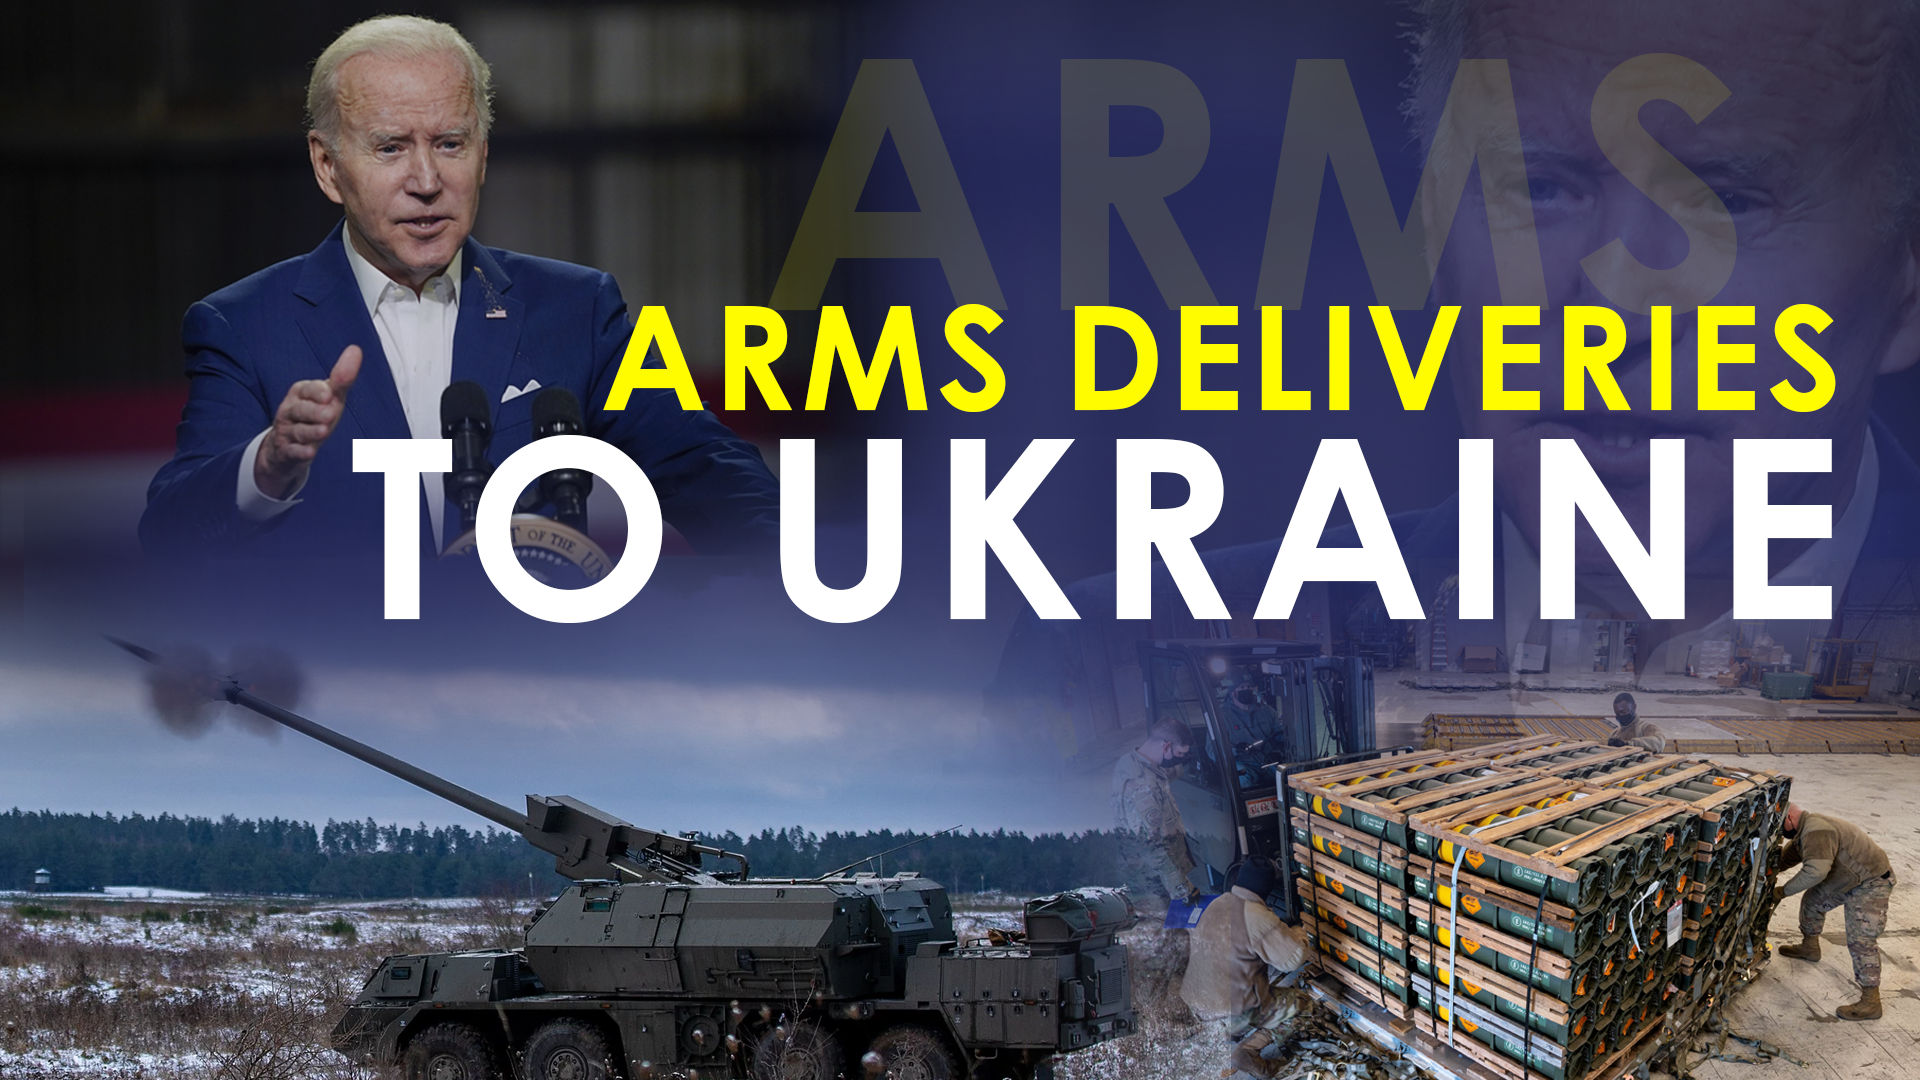 Weapons flowing into Ukraine: where is diplomacy?